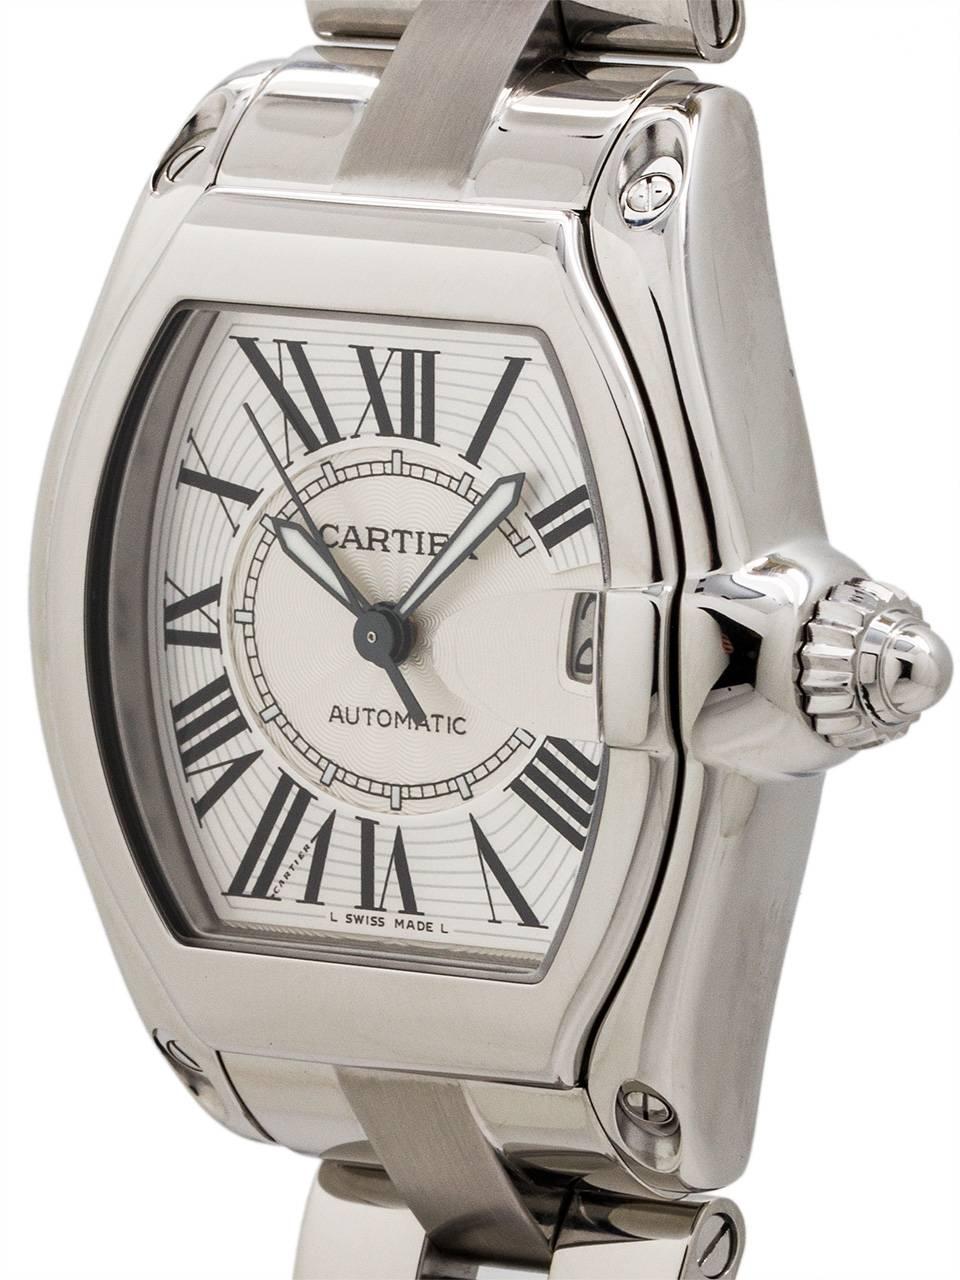 Cartier Man’s Roadster automatic ref# 2510 circa 2000s. 38 x 44.5mm tonneau shaped Stainless Steel case with steel cabochon style screw down crown, matte silver textured dial with black stretch Roman numerals, and black outline kite shaped luminova